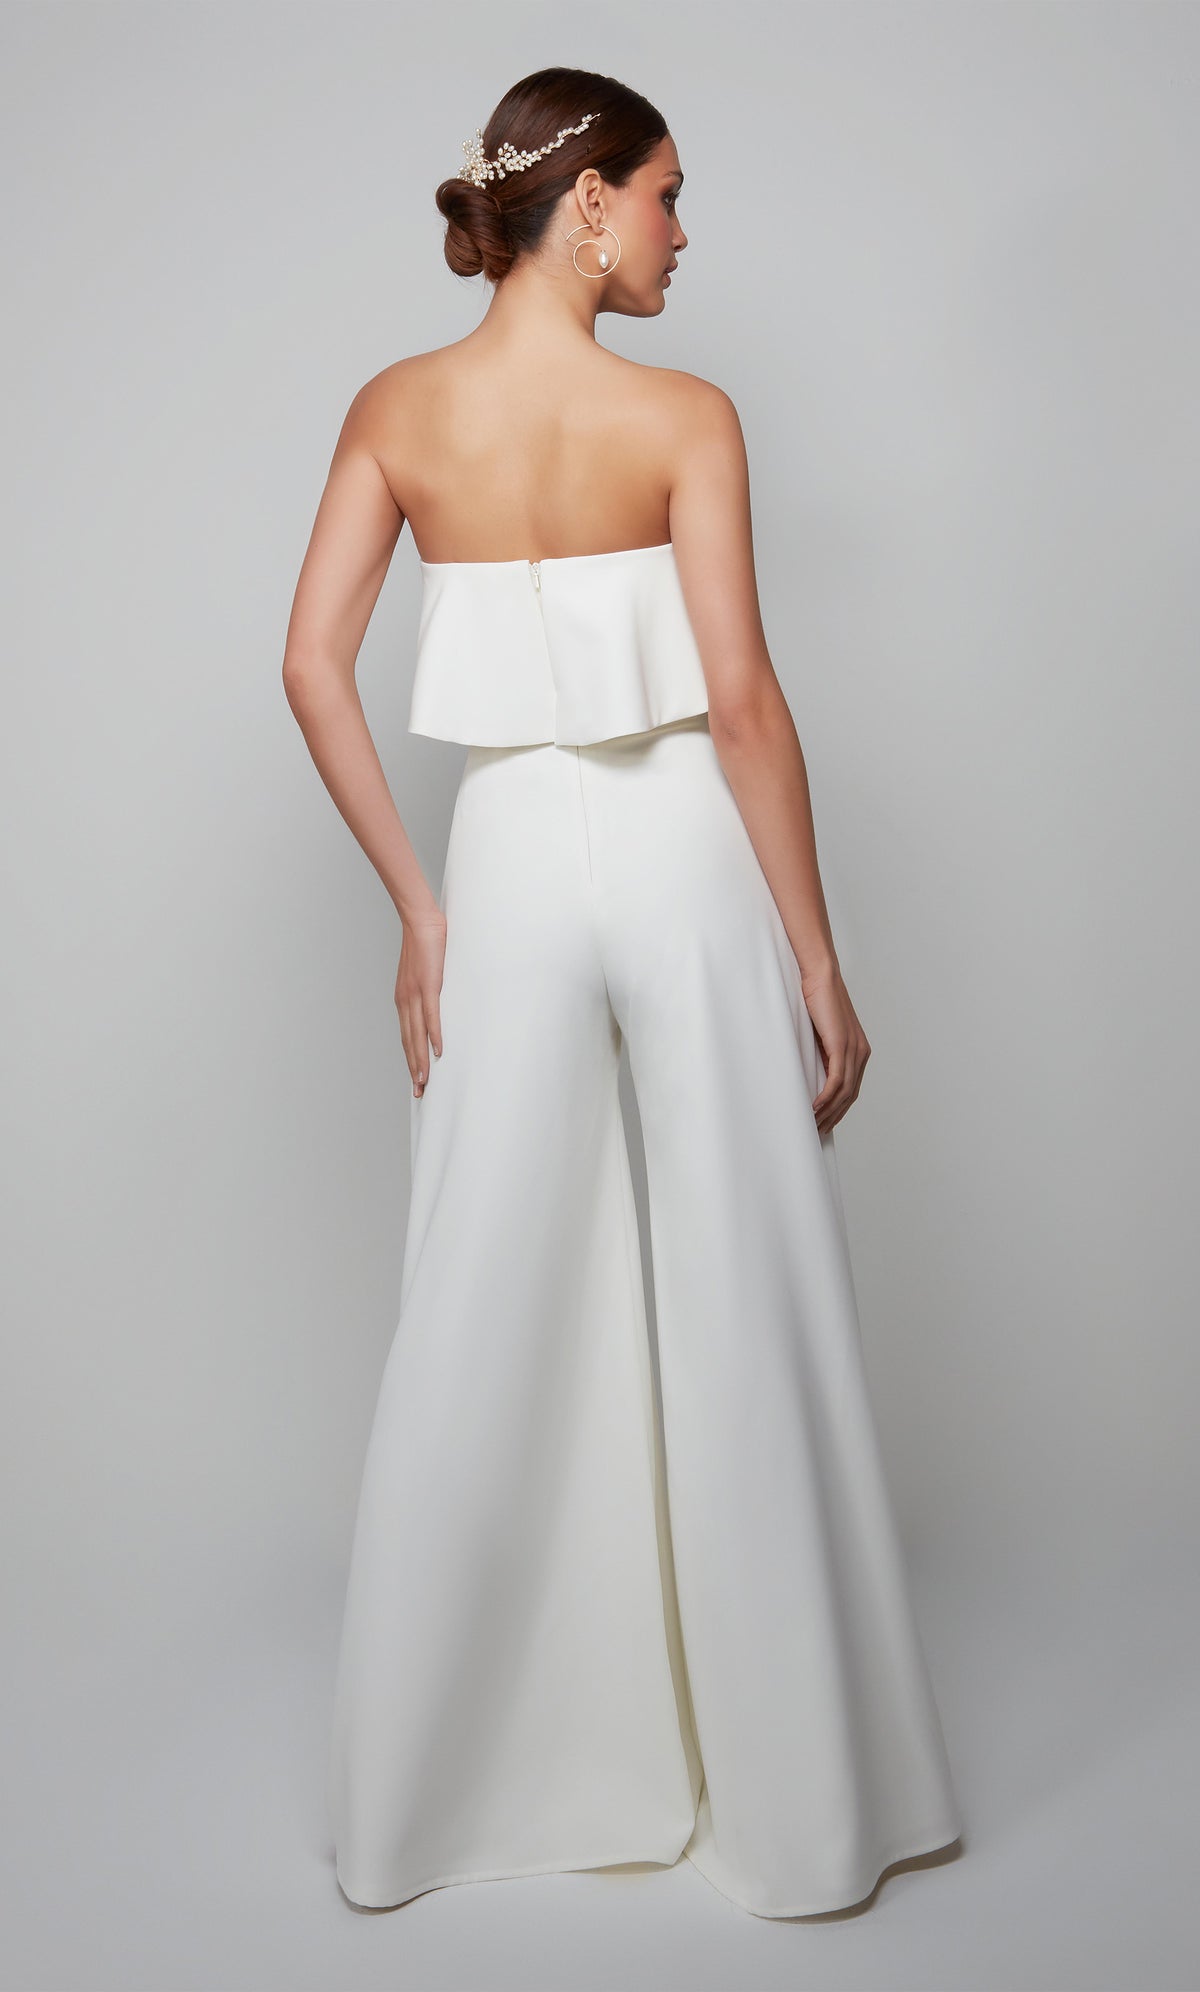 Chic wedding jumpsuit with a ruffle top and zip up back in ivory.